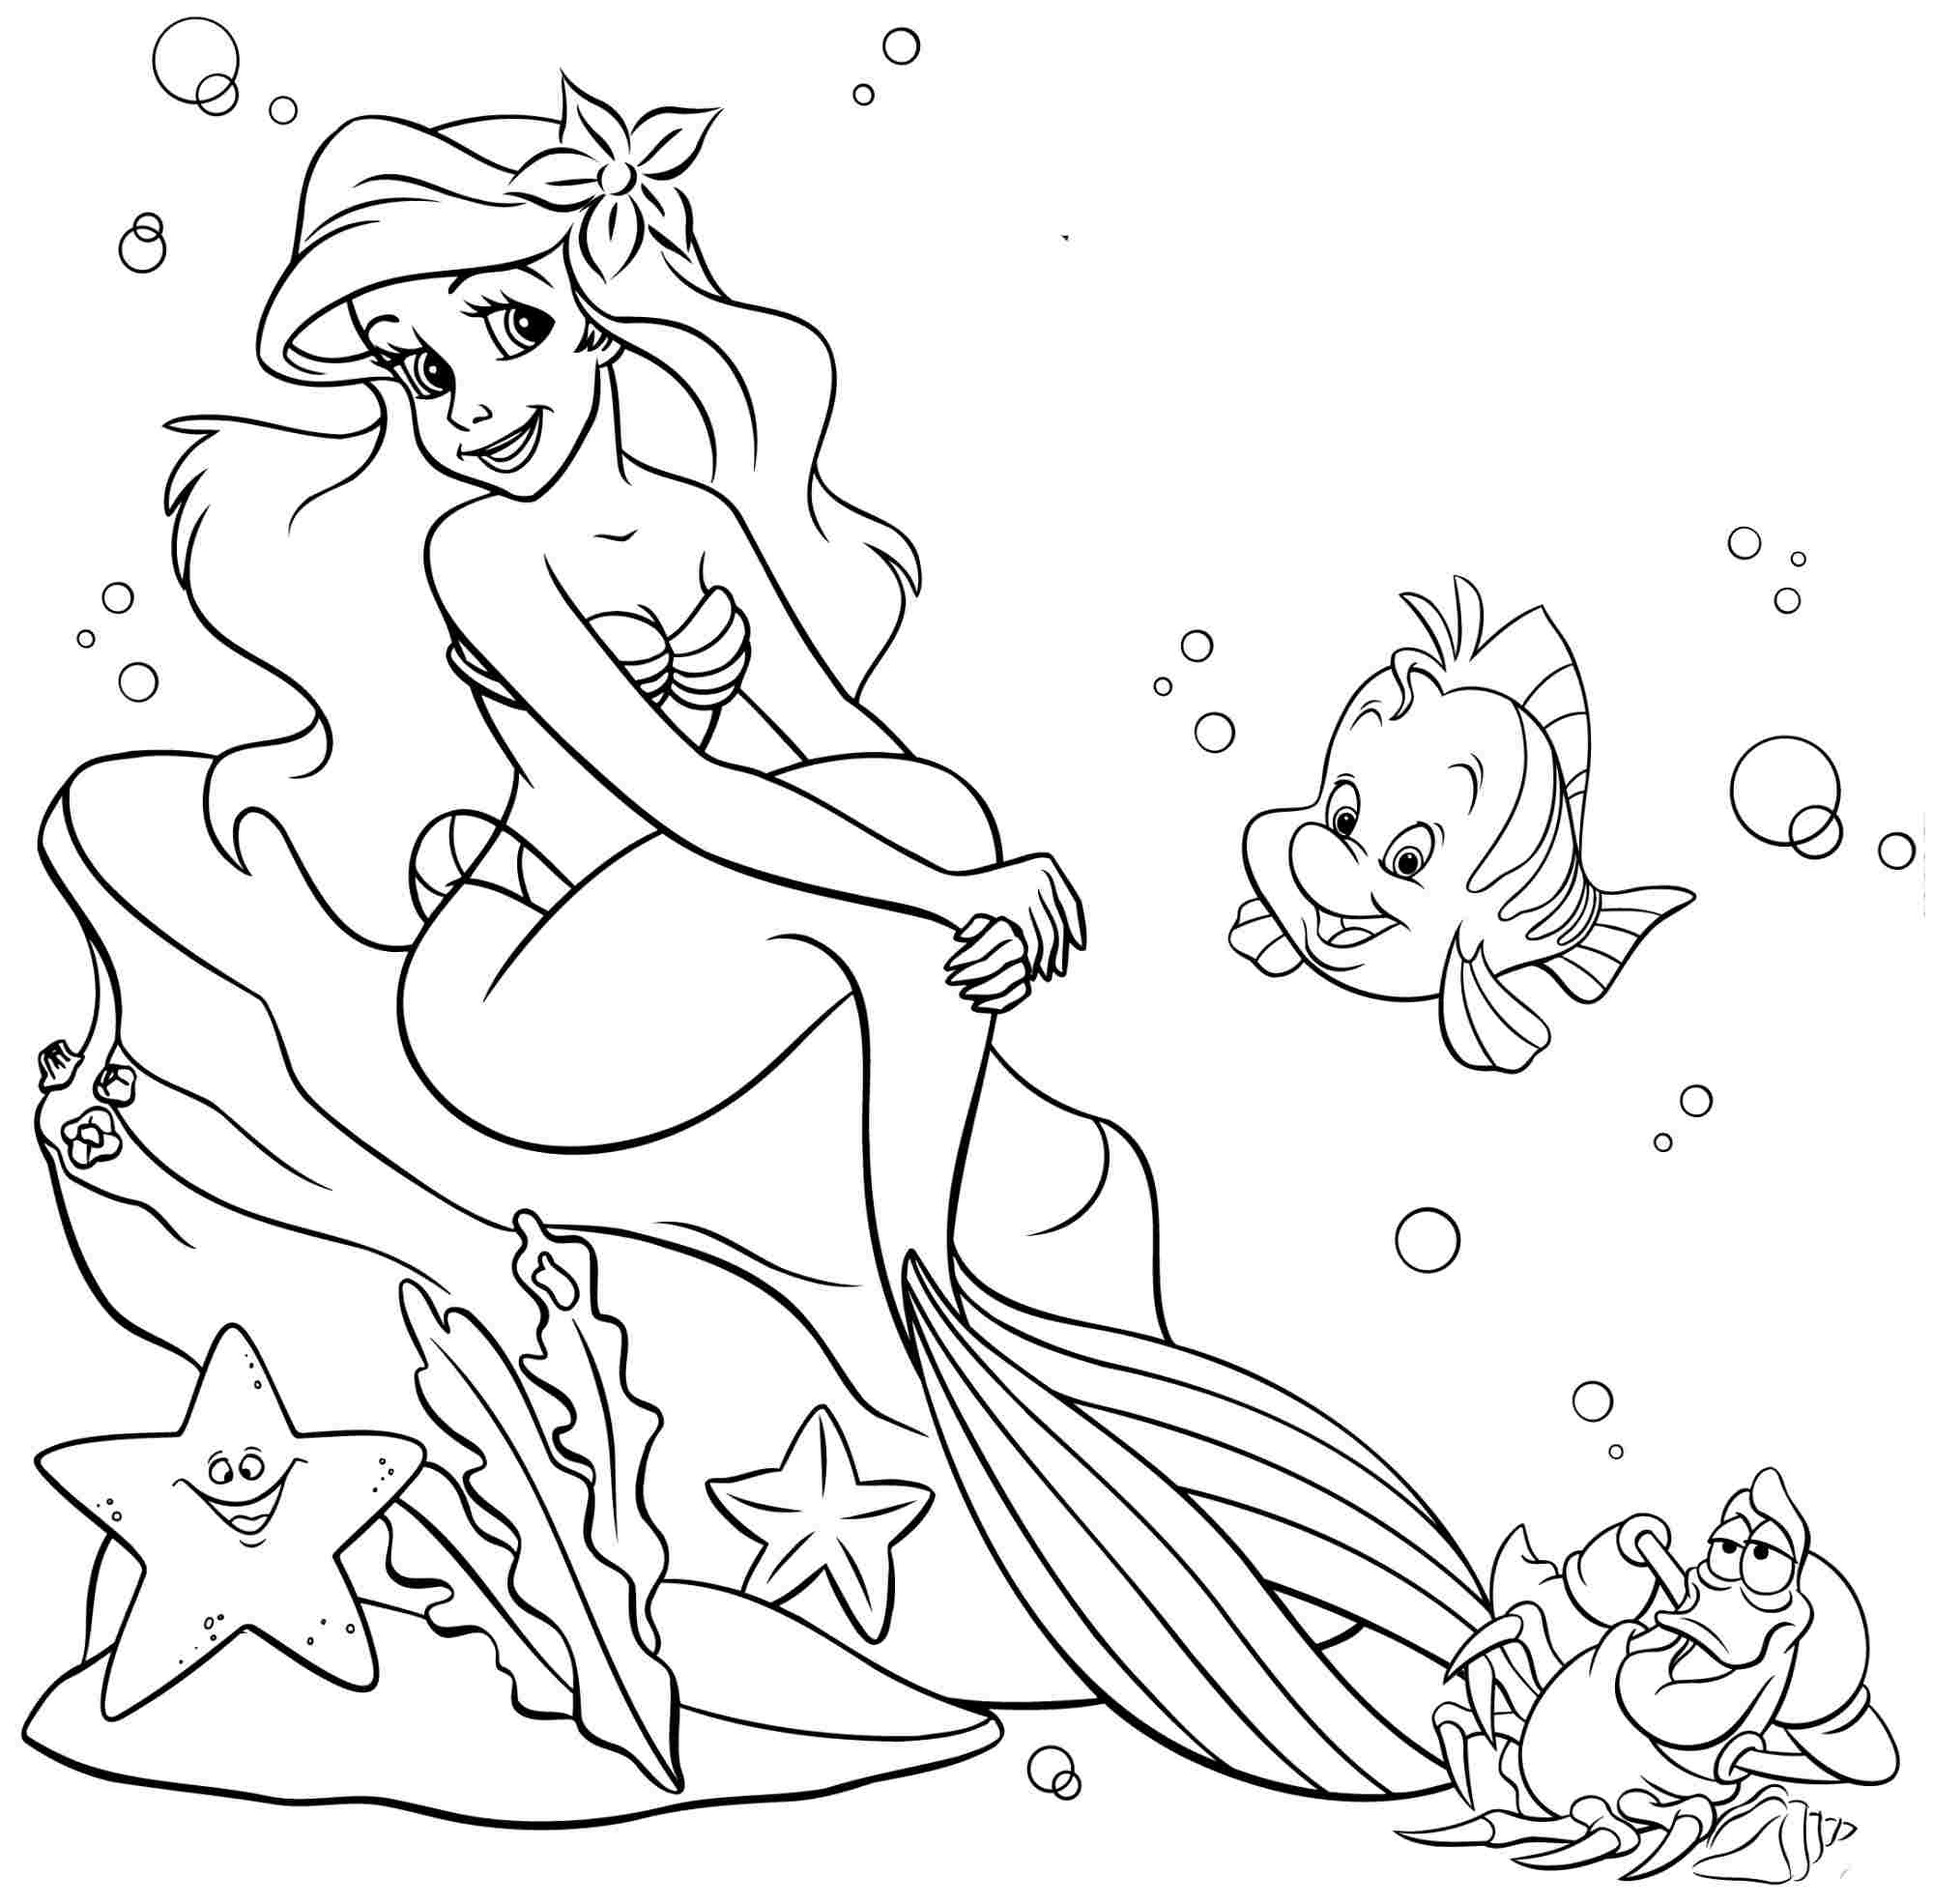 Little mermaid coloring pages to download and print for free